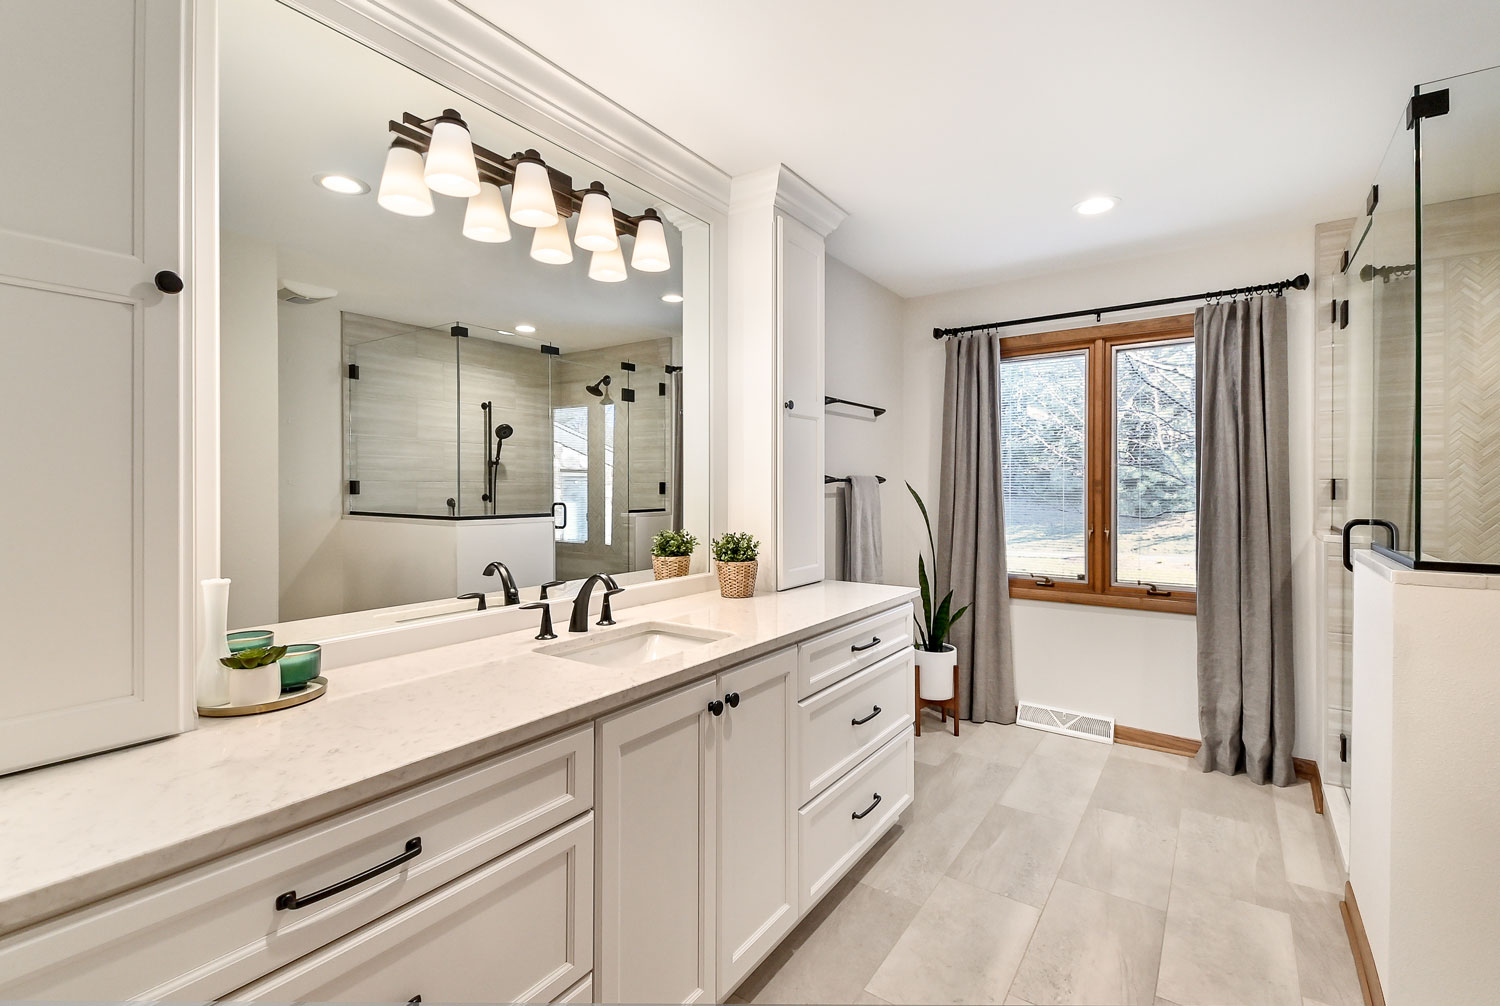 5 Reasons Why You Should Hire a Professional Bathroom Remodeling Service